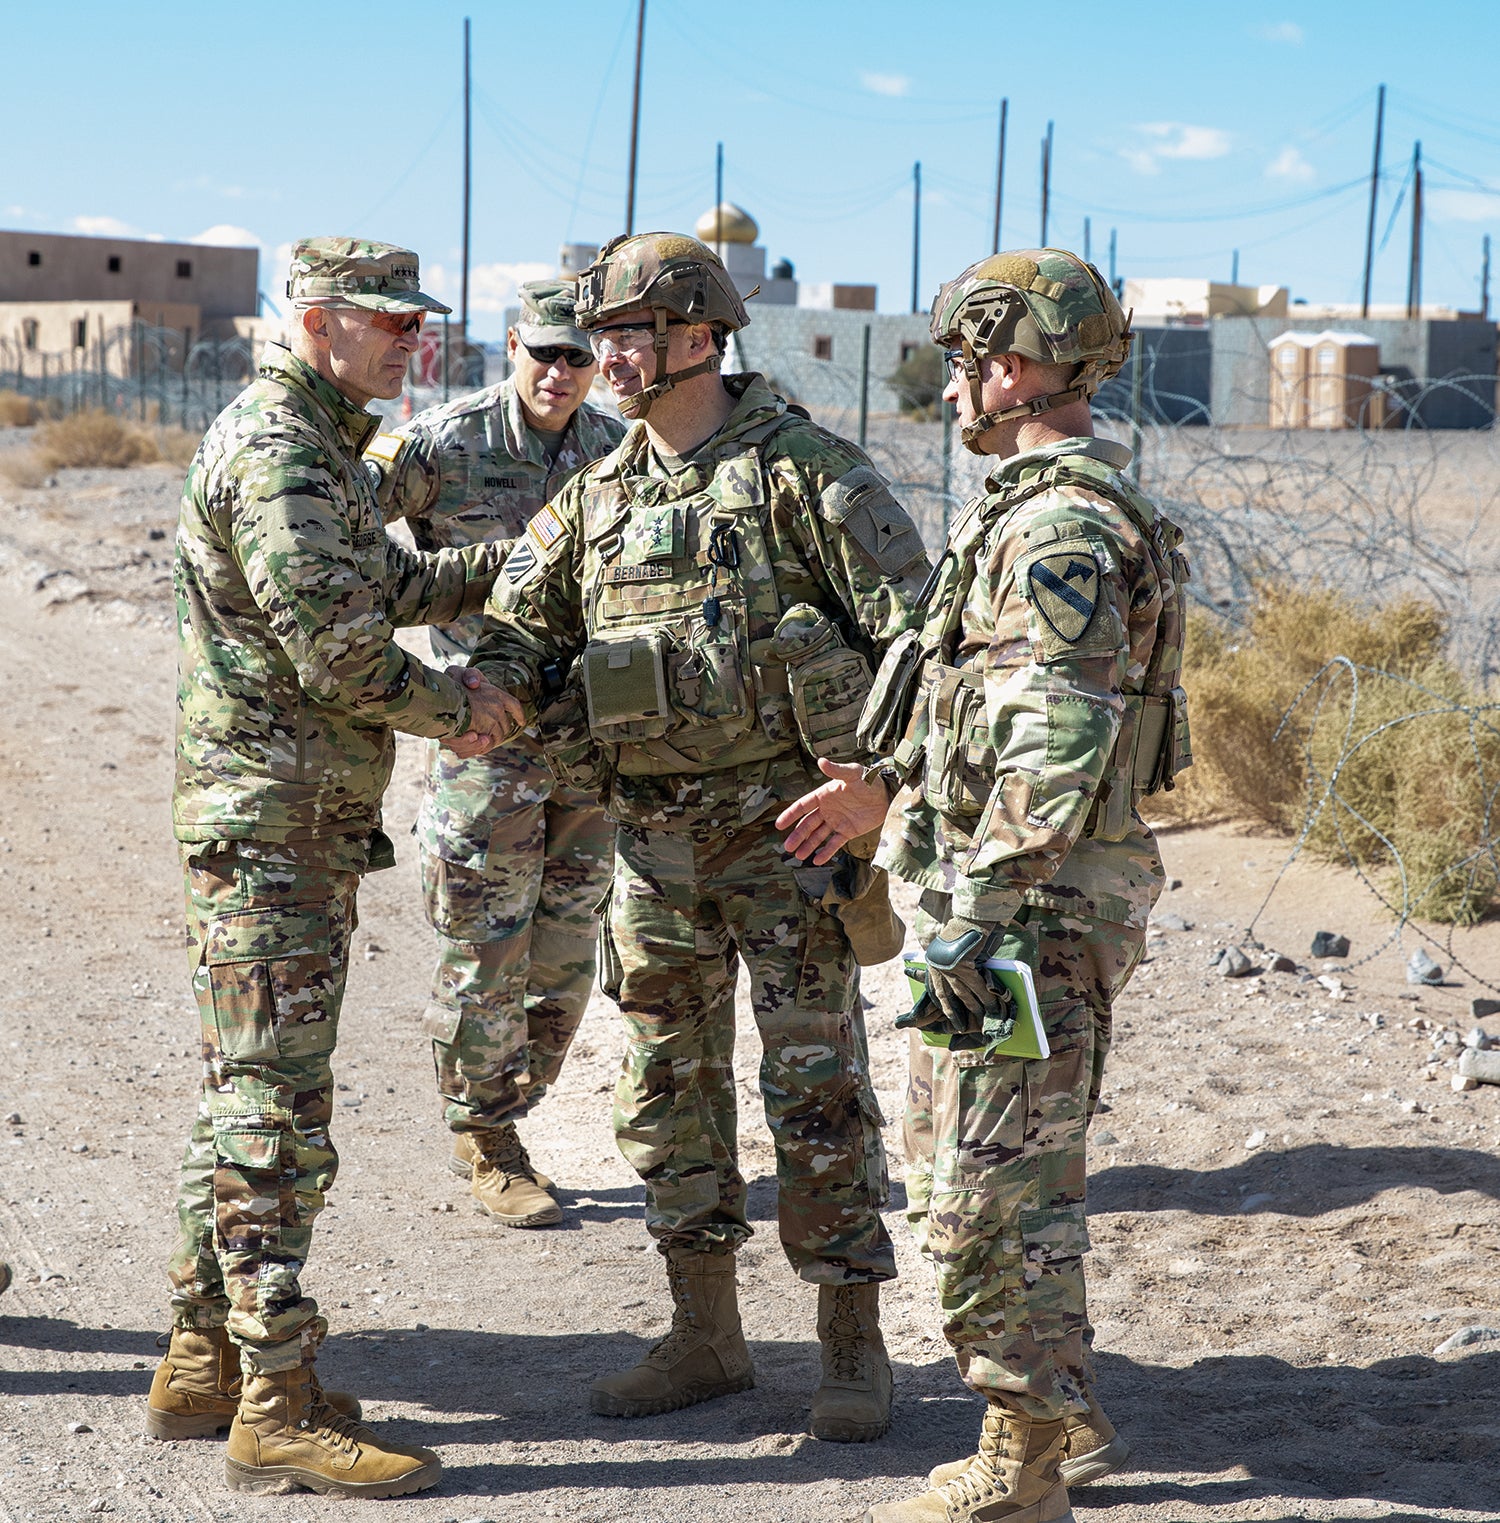 Army Vice Chief of Staff Gen. Randy George, left, shakes hands with Lt. Gen. Sean Bernabe, commanding general of III Corps and Fort Hood, Texas, now known as Fort Cavazos, during a Project Convergence 2022 exercise at Fort Irwin, California. (Credit: U.S. ArmyStaff Sgt. Matthew Lumagui)